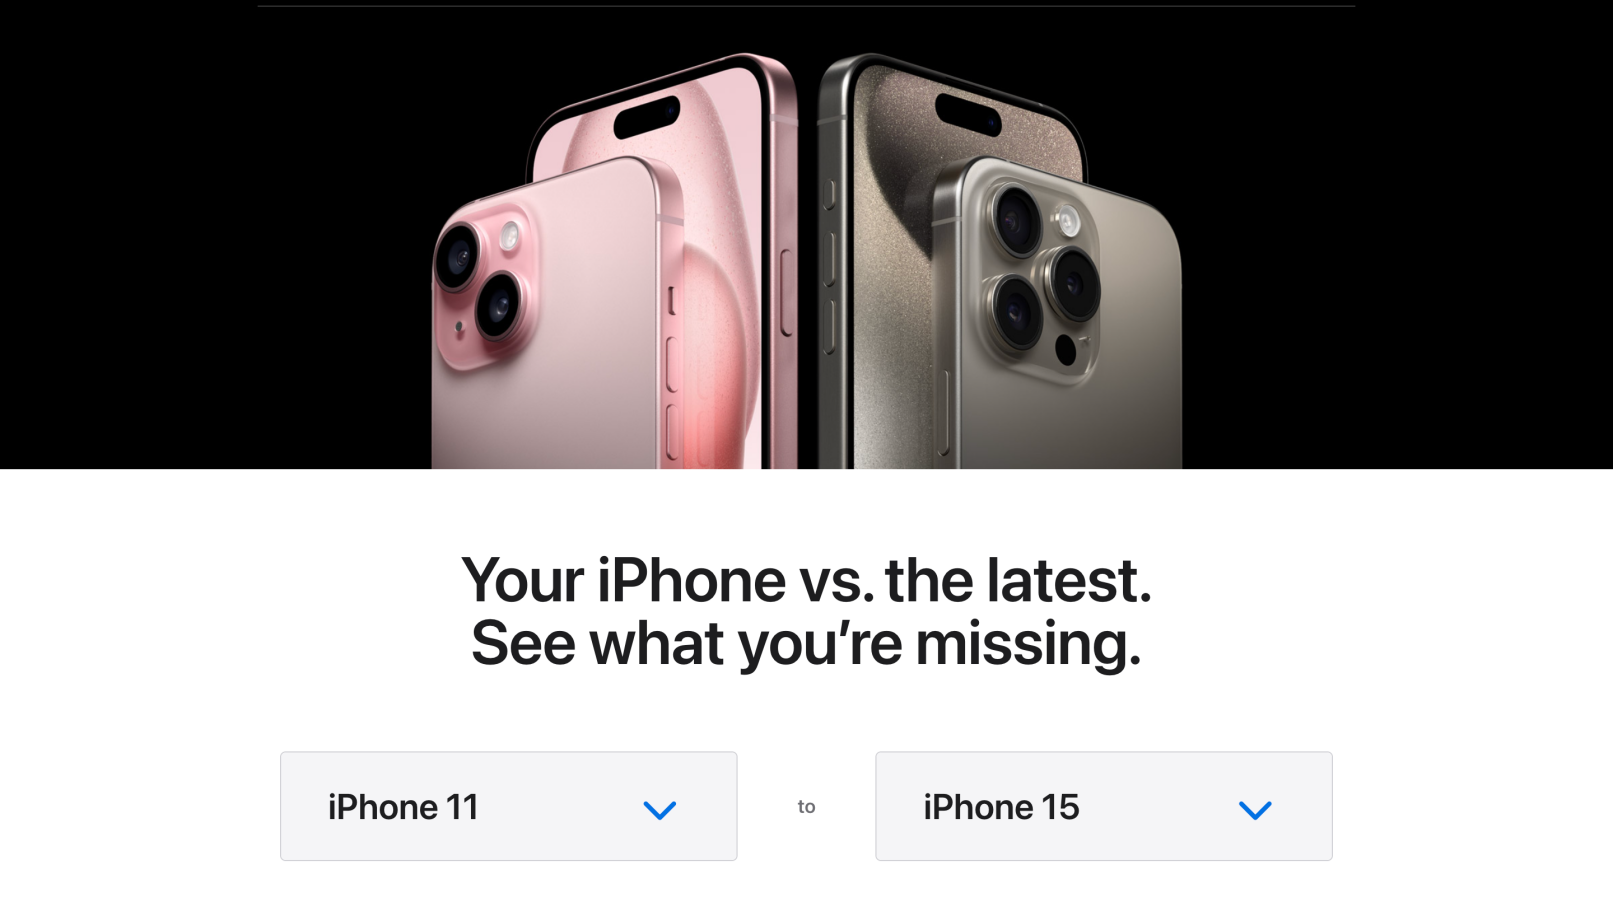 Apple doesn’t dare comparing the iPhone 15 to the iPhone 14, or iPhone 13. - Crazy but true! Apple “admits” you don’t need to upgrade to iPhone 15 (and I agree)